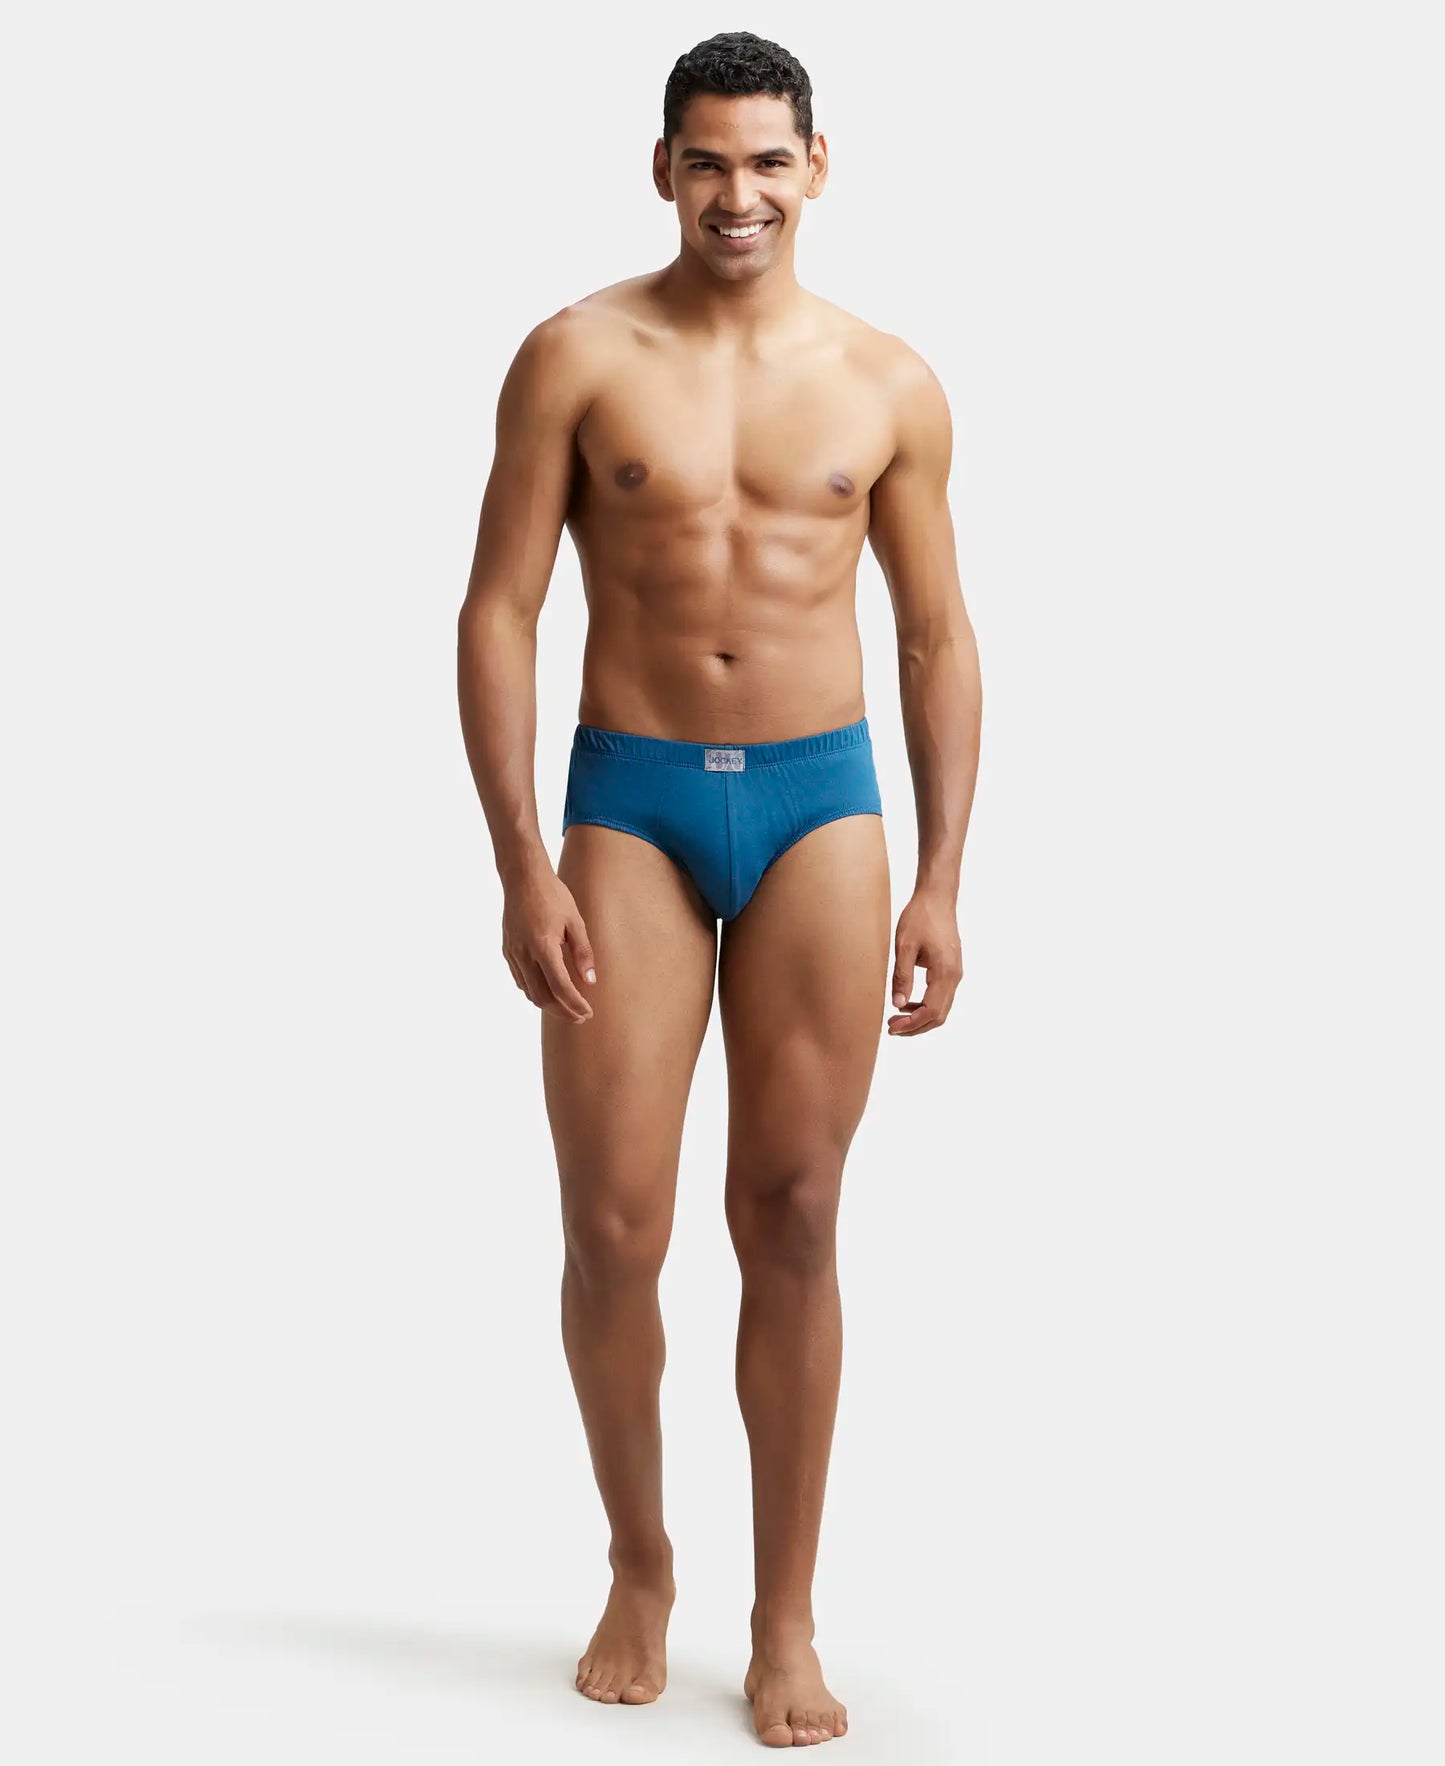 Super Combed Cotton Solid Brief with Ultrasoft Concealed Waistband - Seaport Teal-4